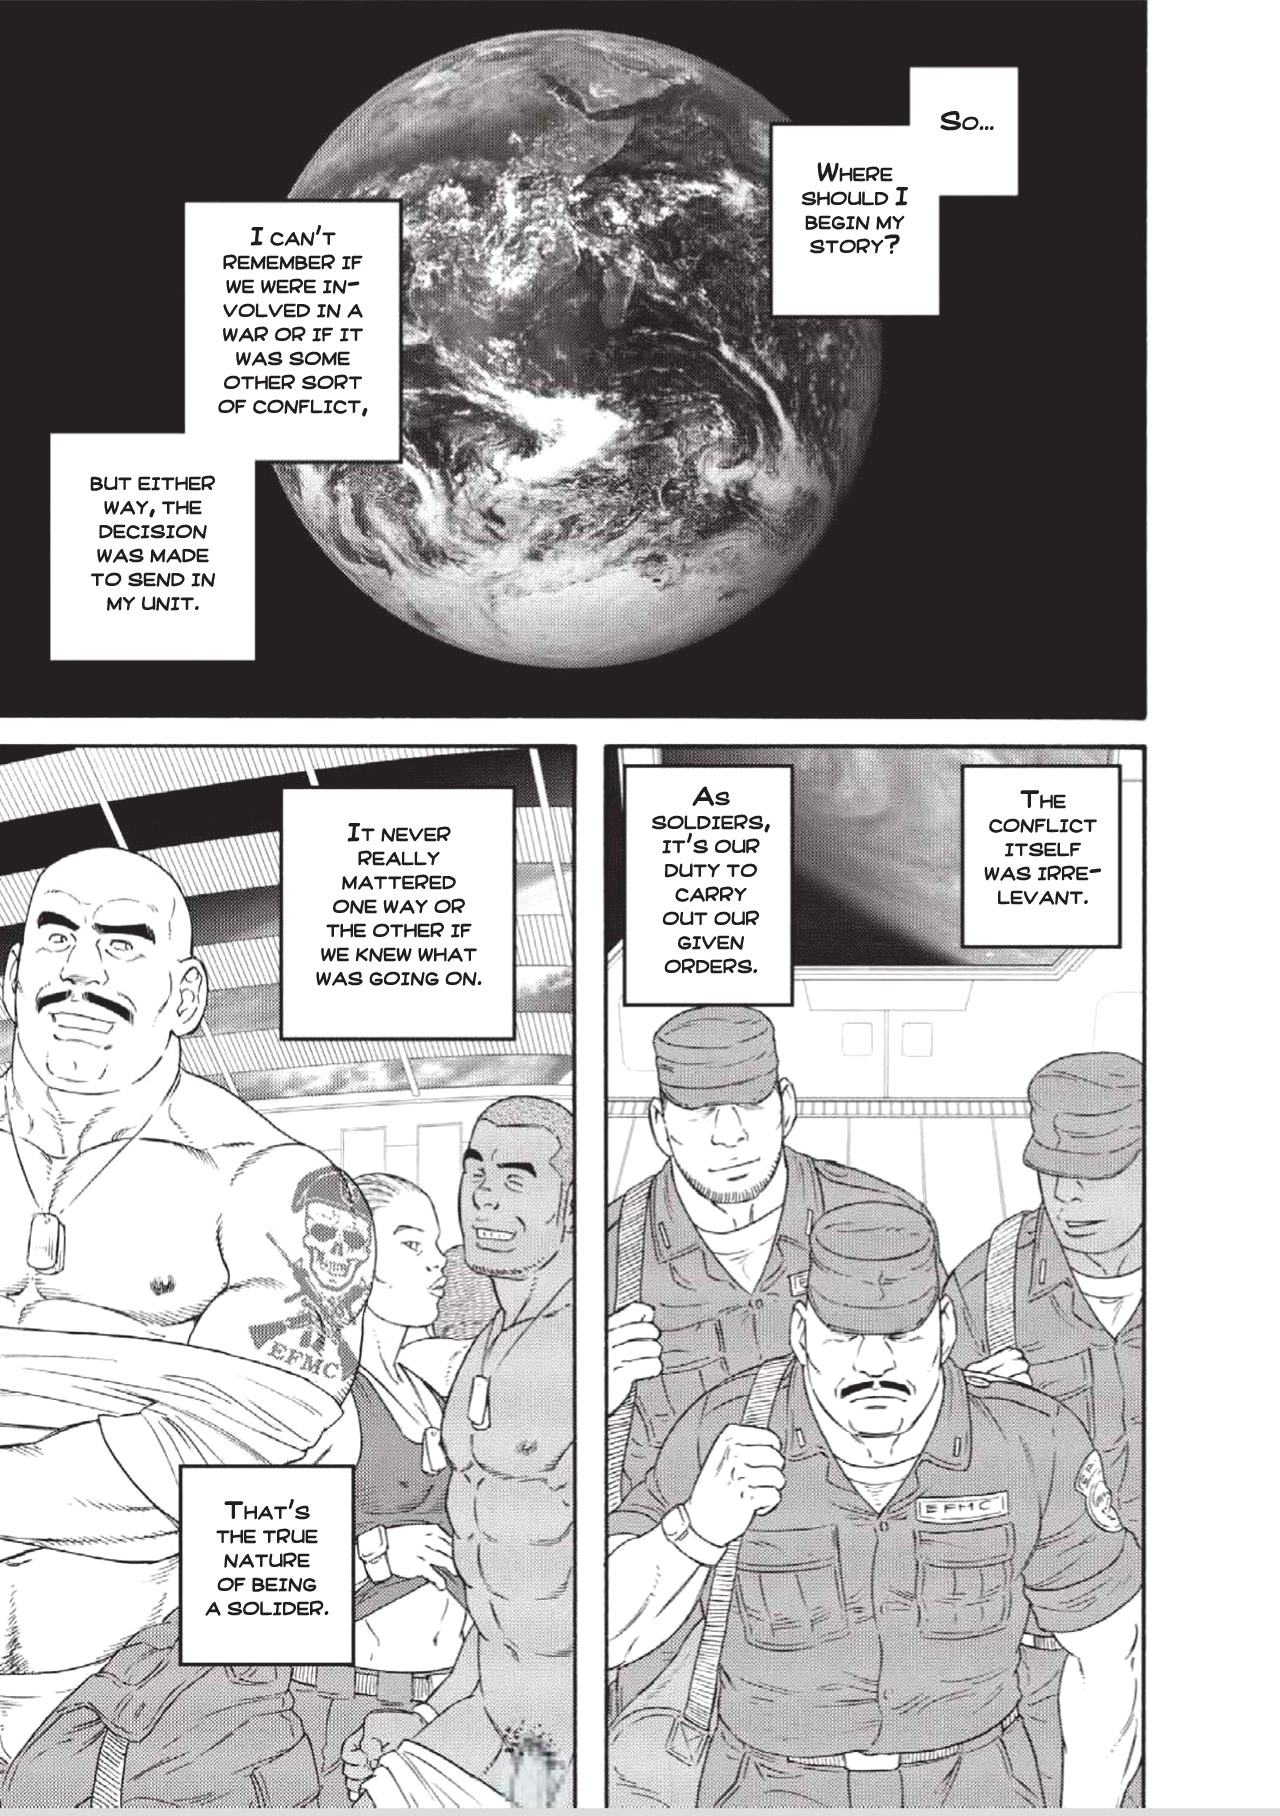 [Tagame] Planet Brobdingnag chapter 1 [Eng] page 1 full